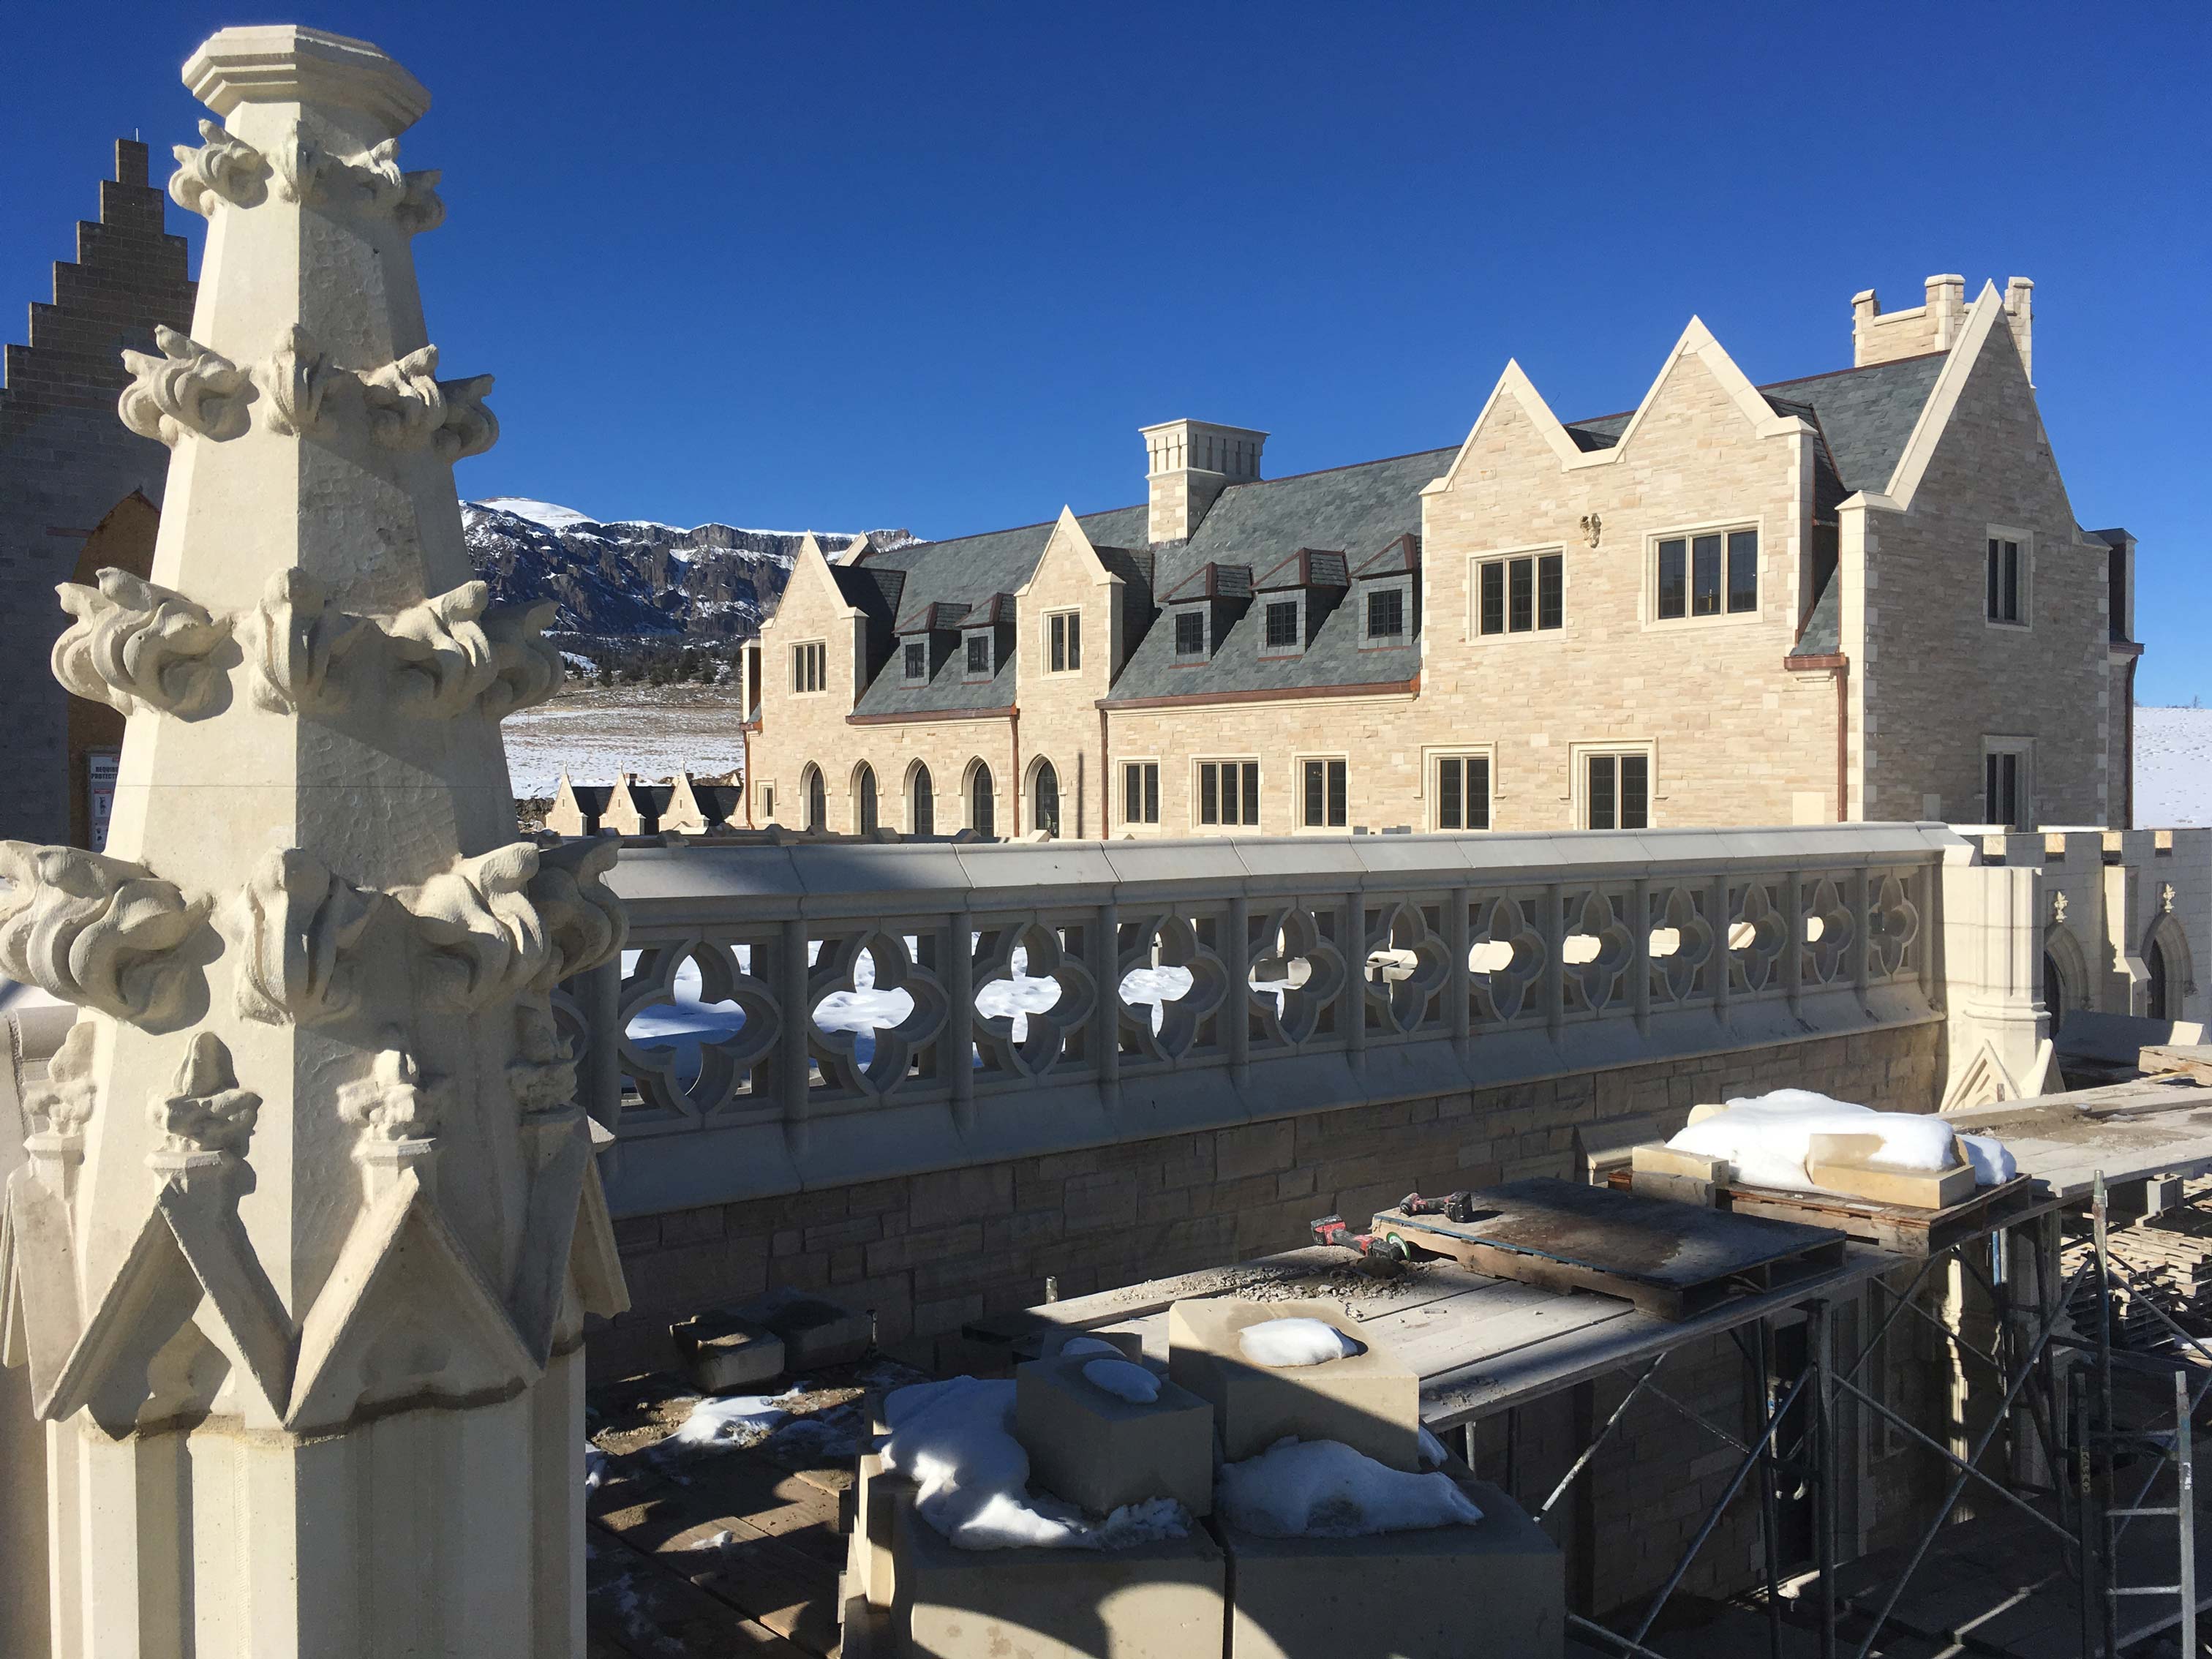 Carmelite Monks of Wyoming Monastery with Gothic architectural features in foreground